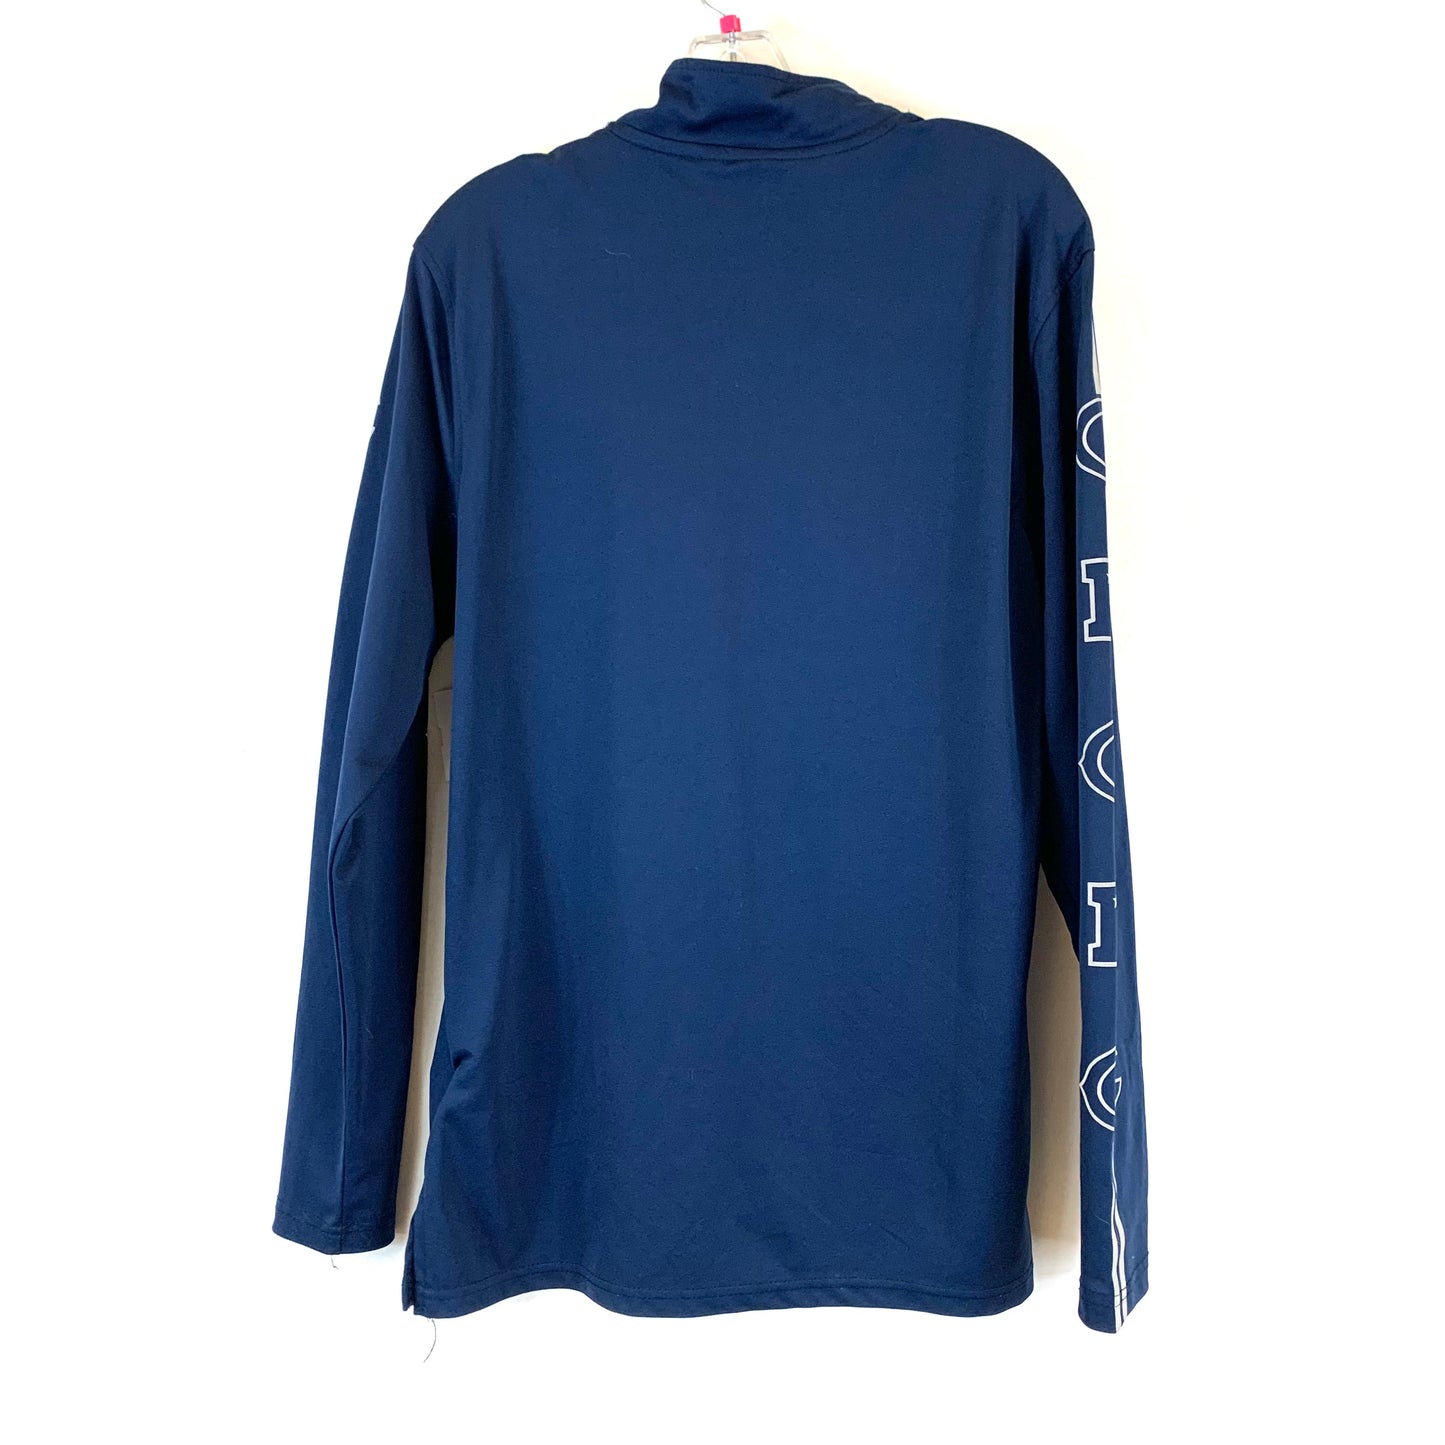 Athletic Top Long Sleeve Collar By Nfl  Size: L